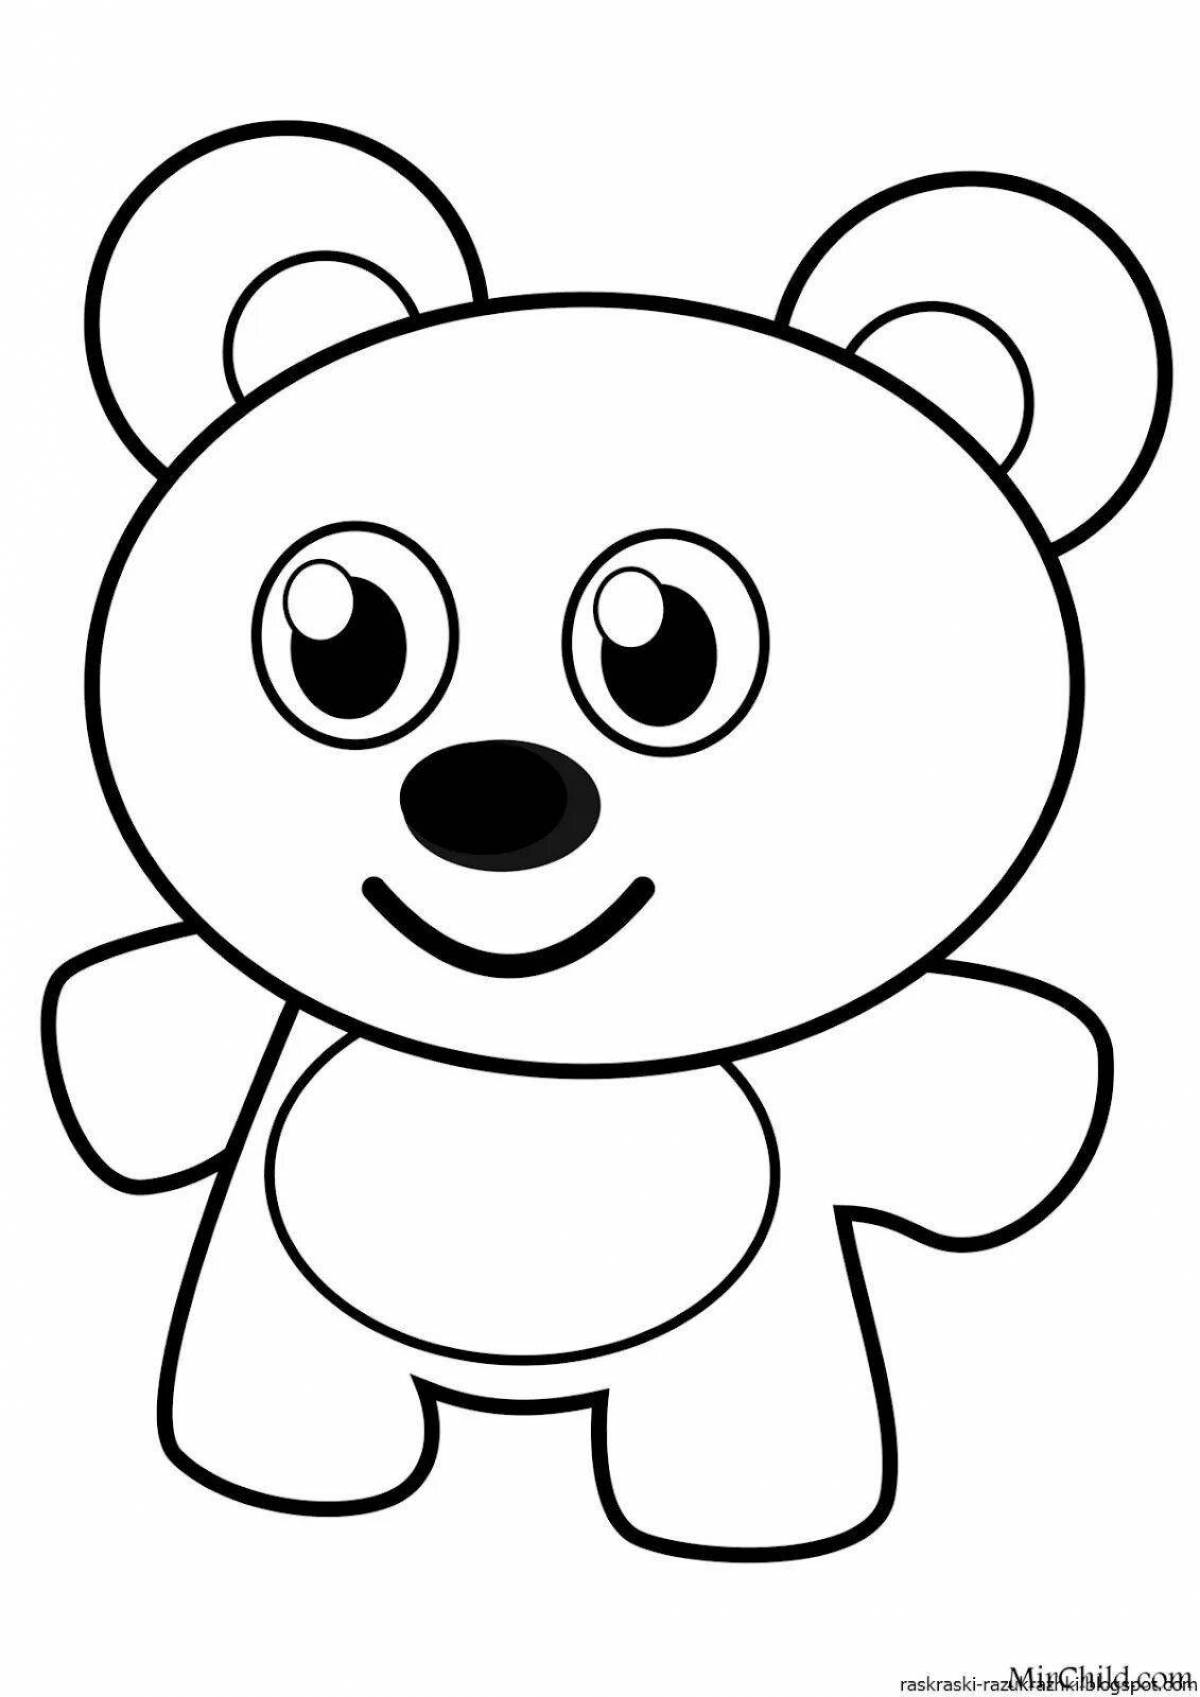 Color-glorious coloring page for small children 3-4 years old